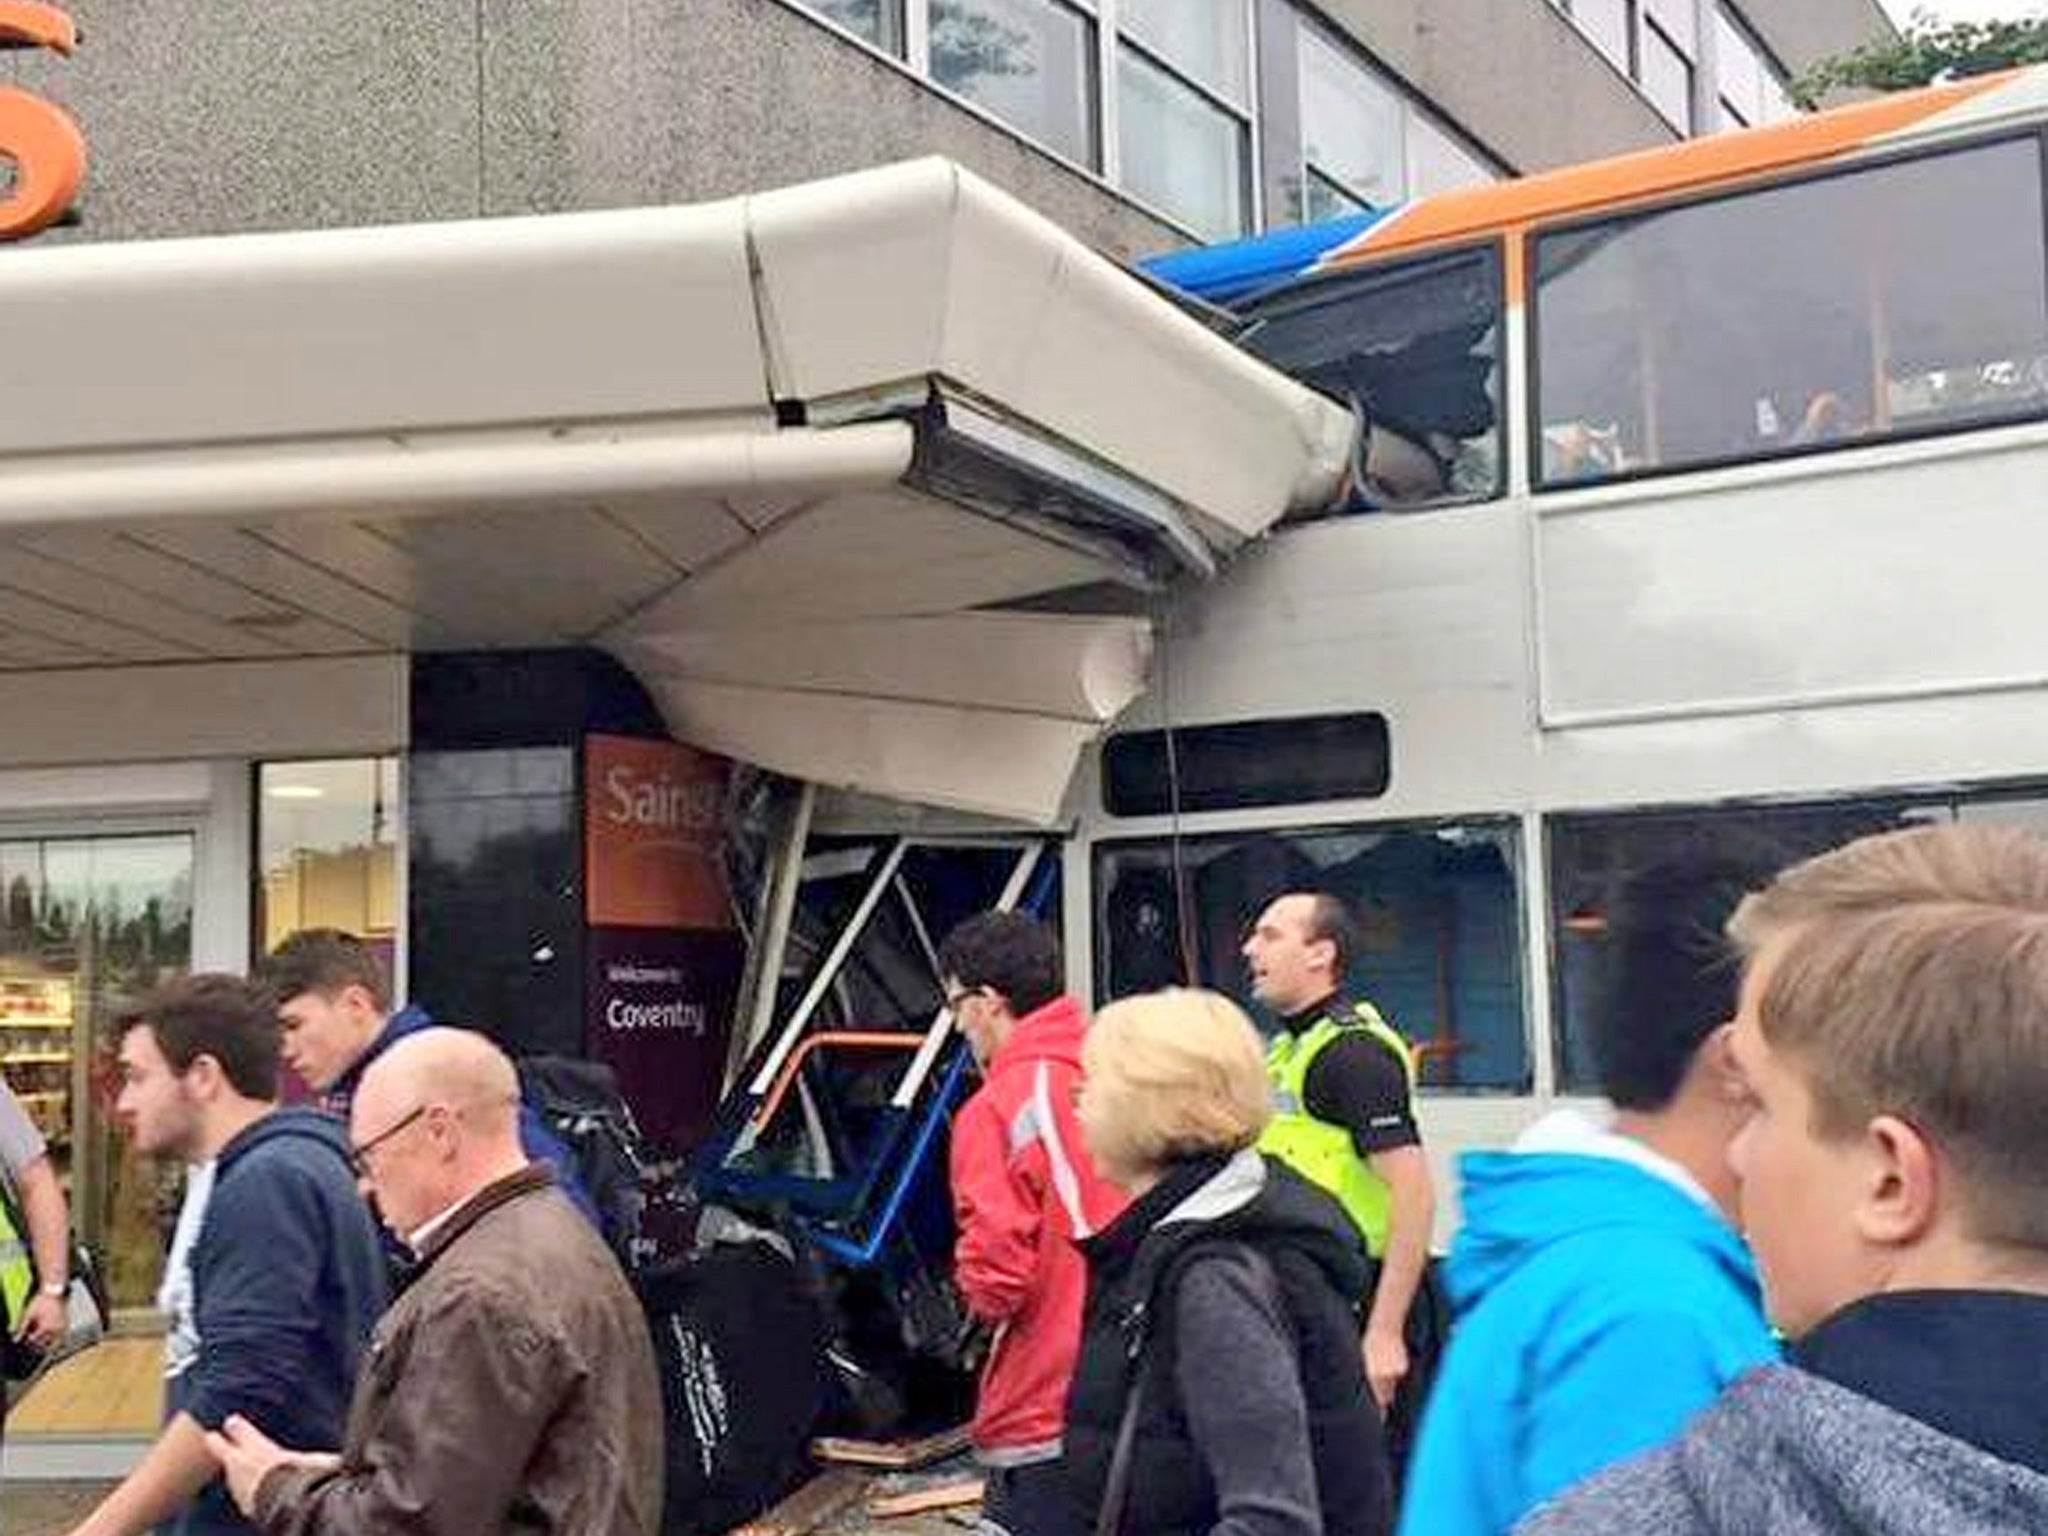 The scene where a bus crashed into a Sainsbury's supermarket in Coventry